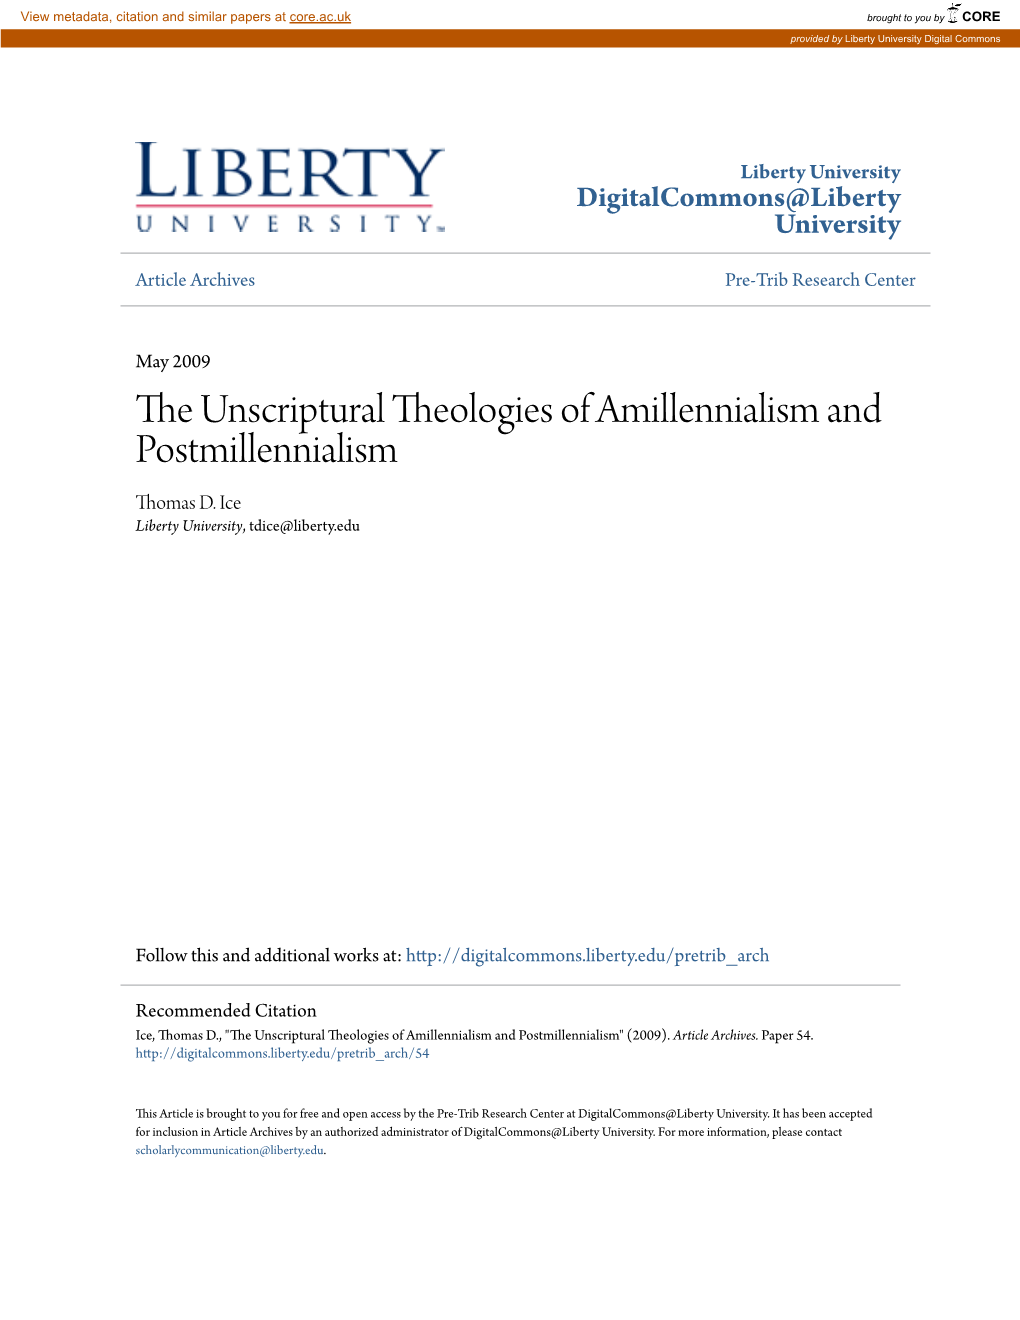 THE UNSCRIPTURAL THEOLOGIES of AMILLENNIALISM and POSTMILLENNIALISM by Thomas Ice